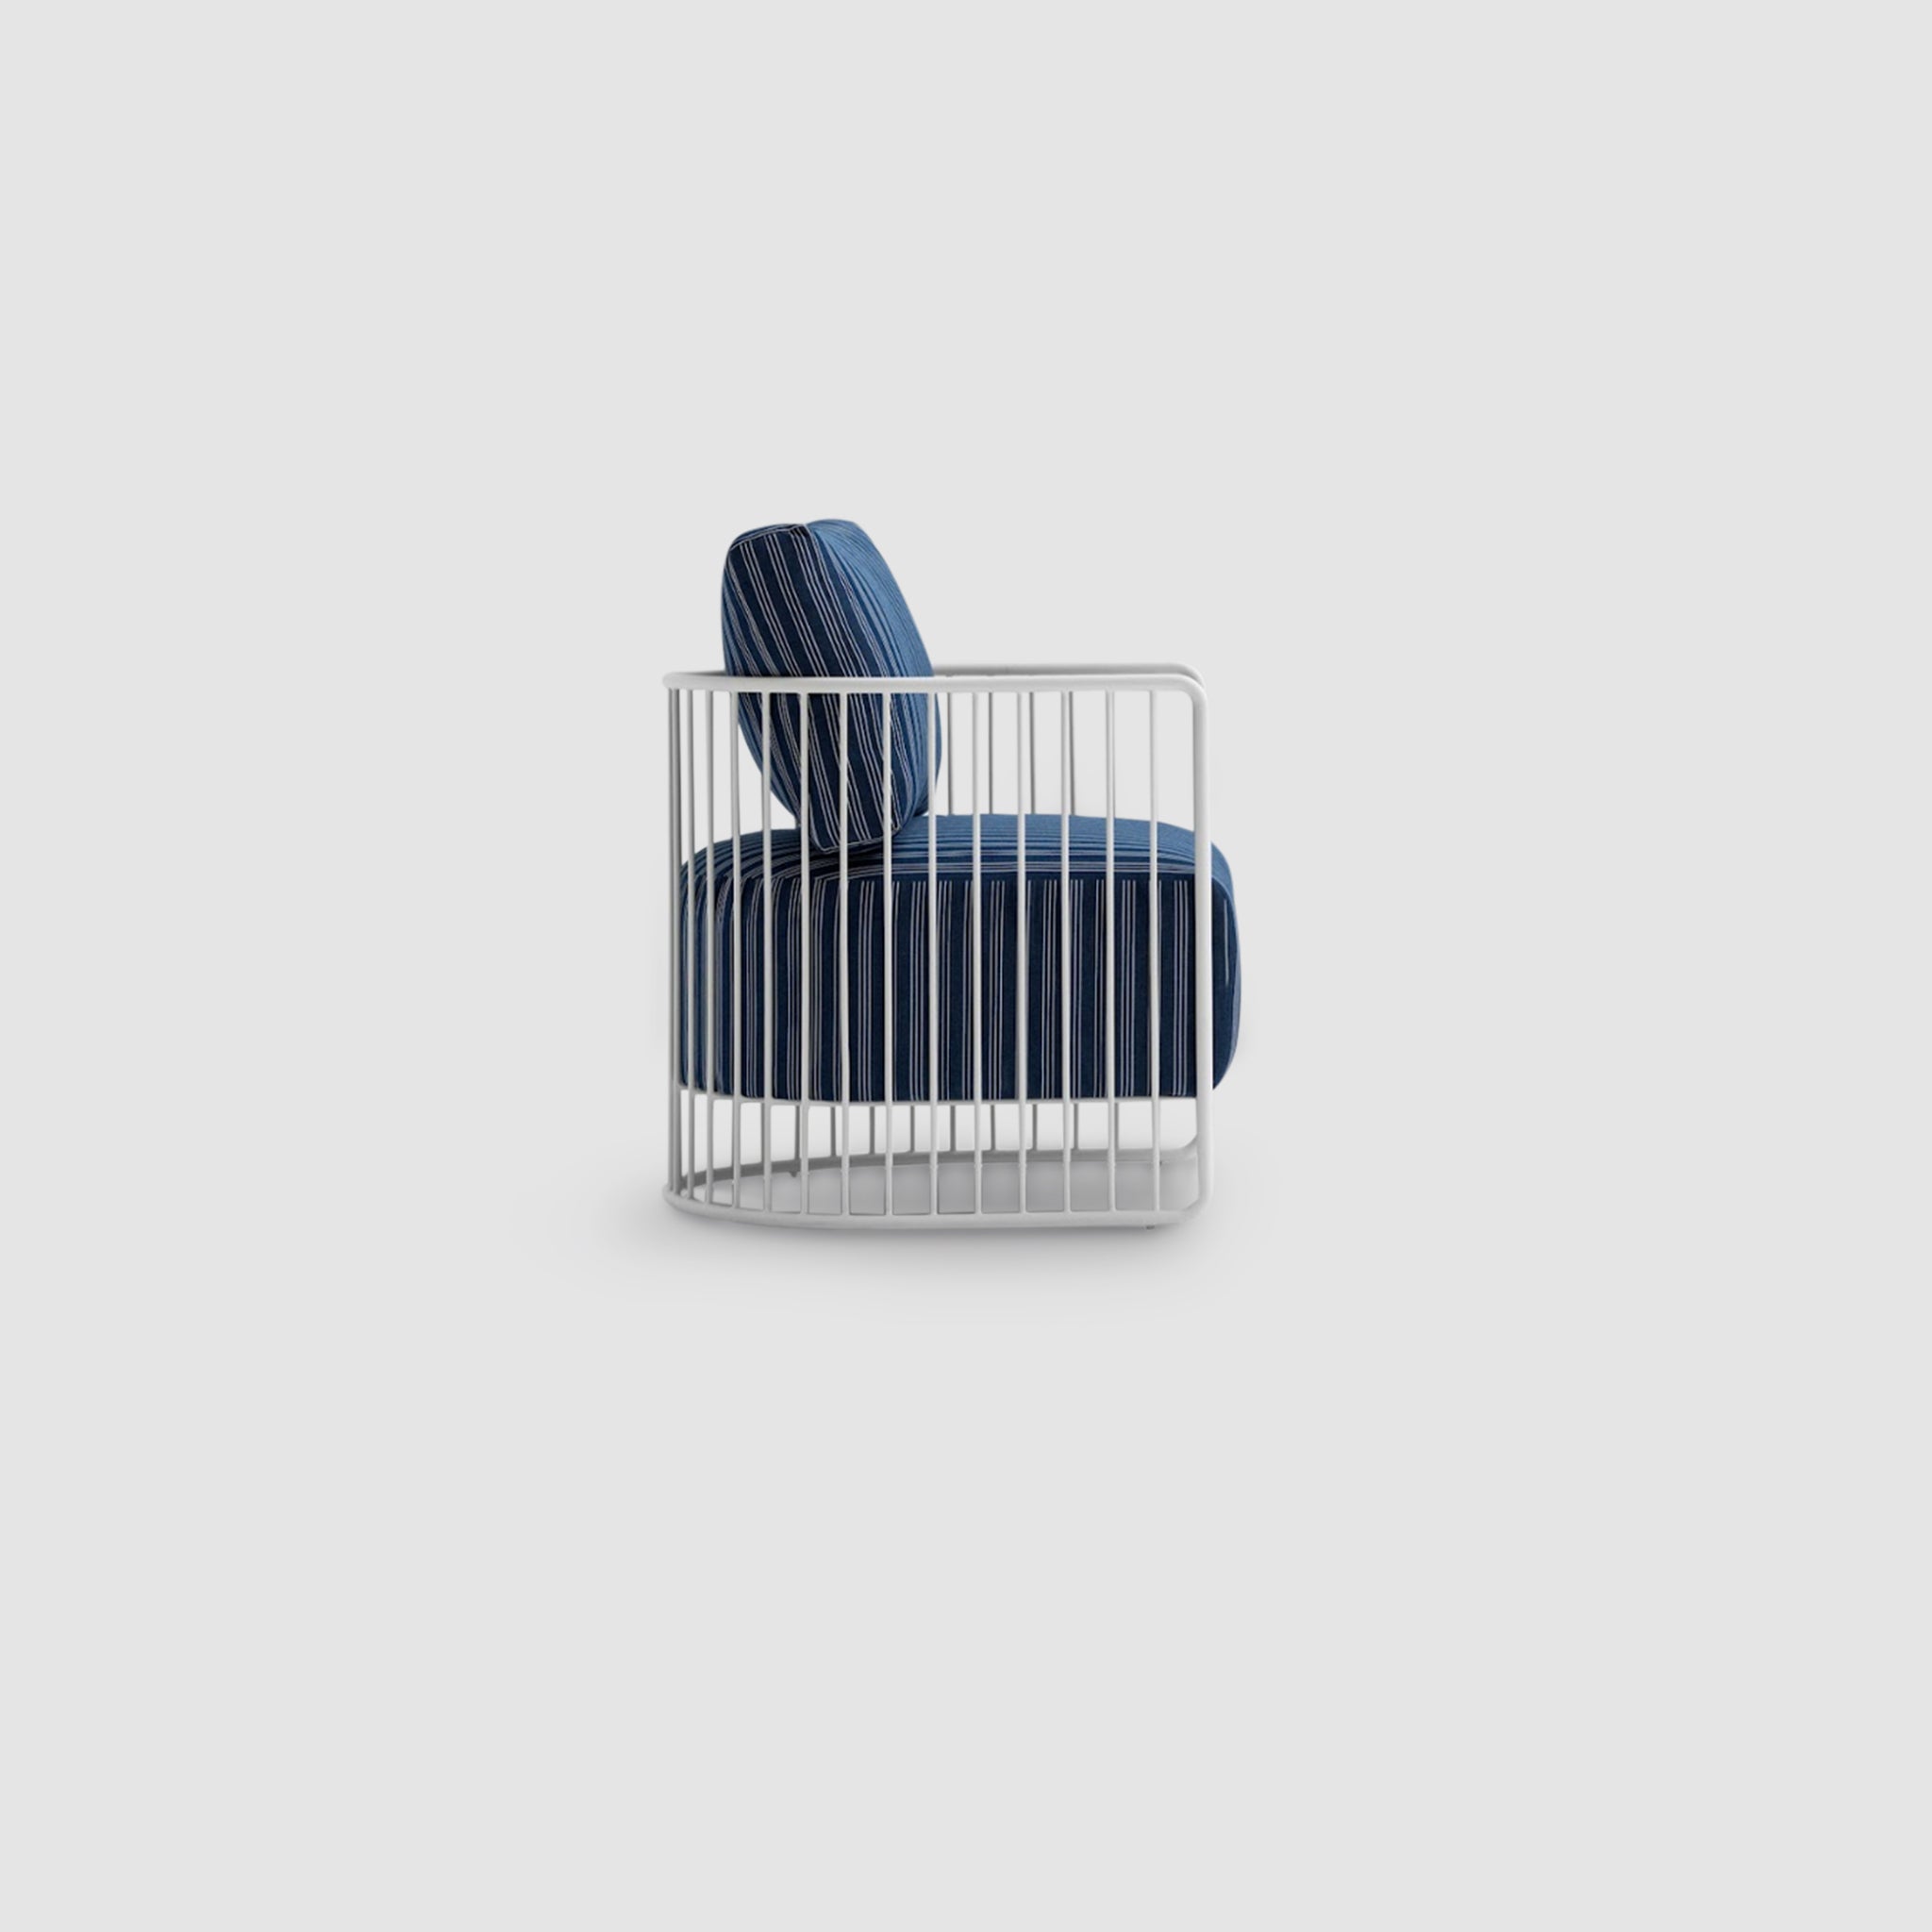 Side profile view of The Willa Outdoor Accent Chair featuring a modern white metal frame with plush blue cushions, designed for both style and comfort in outdoor settings.